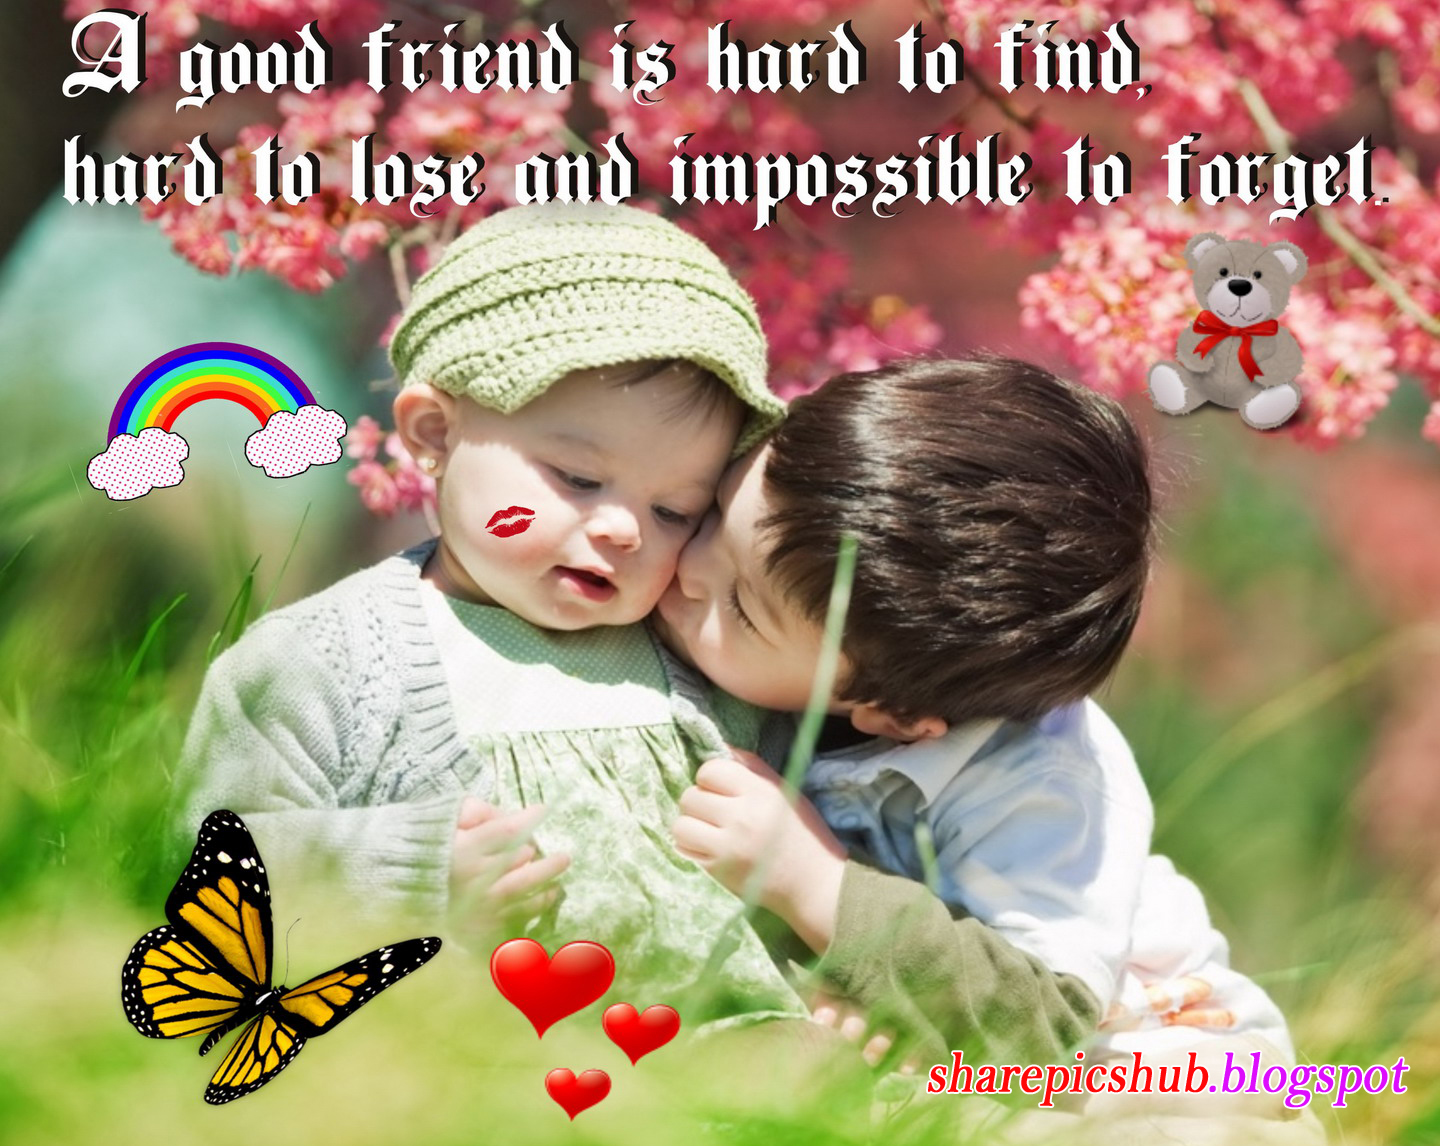 cute friendship wallpapers images,people in nature,friendship,child,love,happy